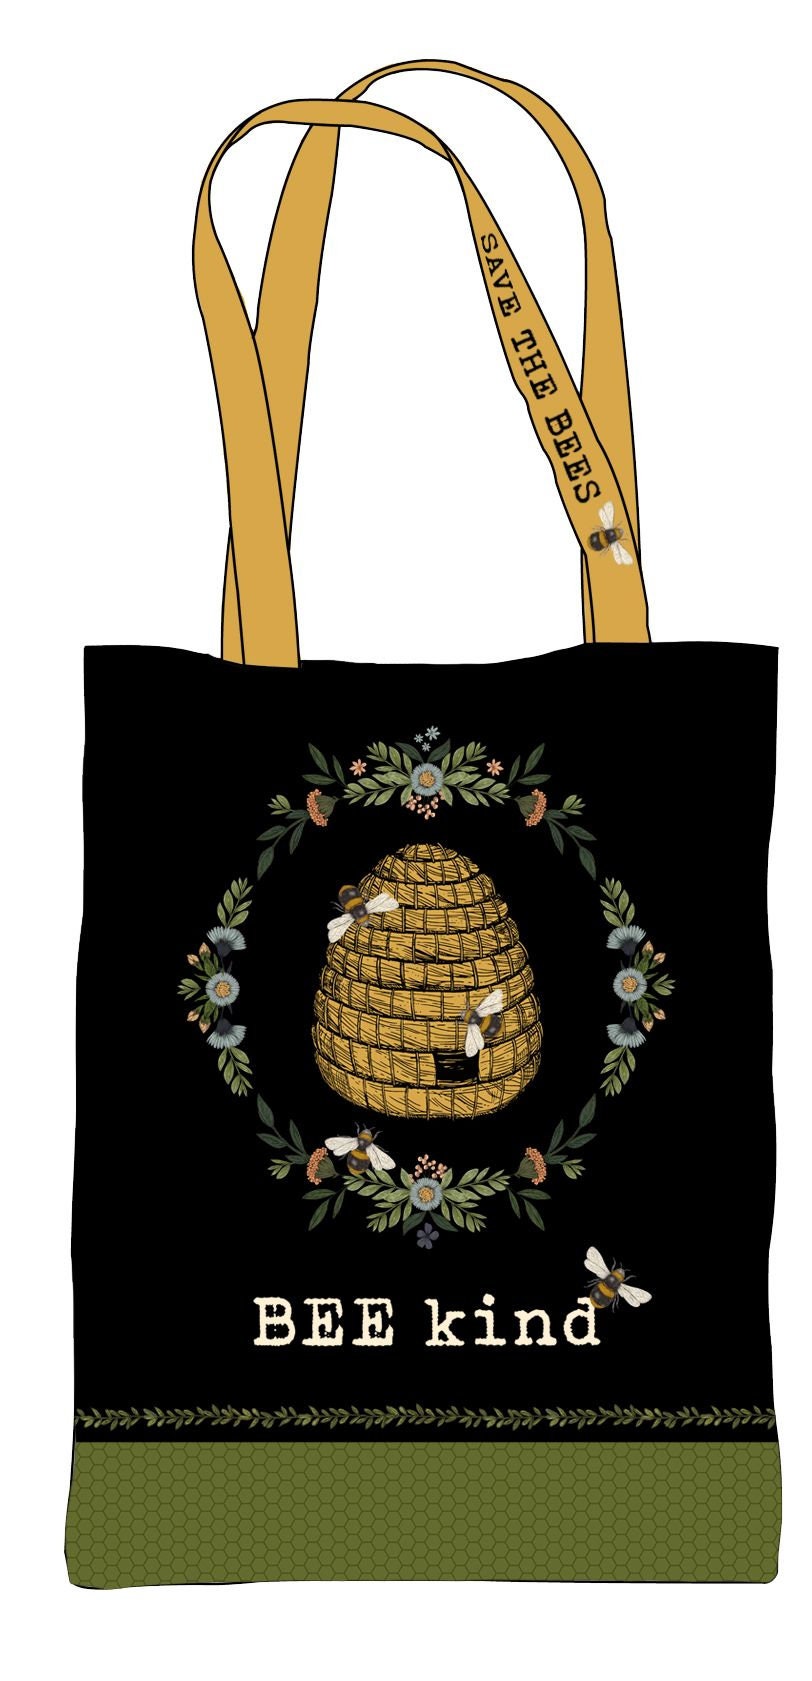 Bee Kind by Jade Mosinski 24" Panel Tote Bag (finished bag size is 18" x 17") C23749-99 Canvas Fabric